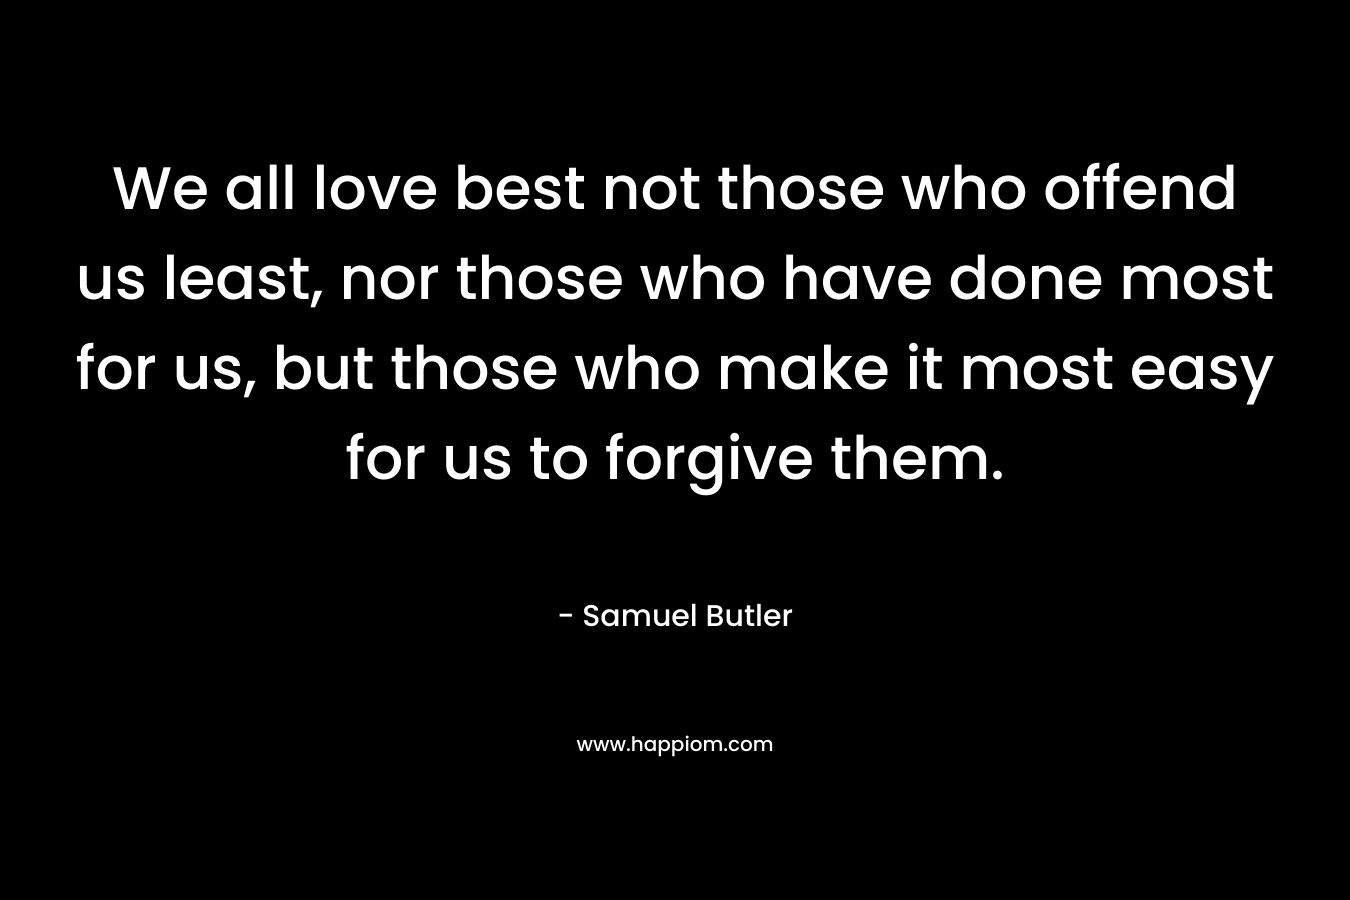 We all love best not those who offend us least, nor those who have done most for us, but those who make it most easy for us to forgive them.